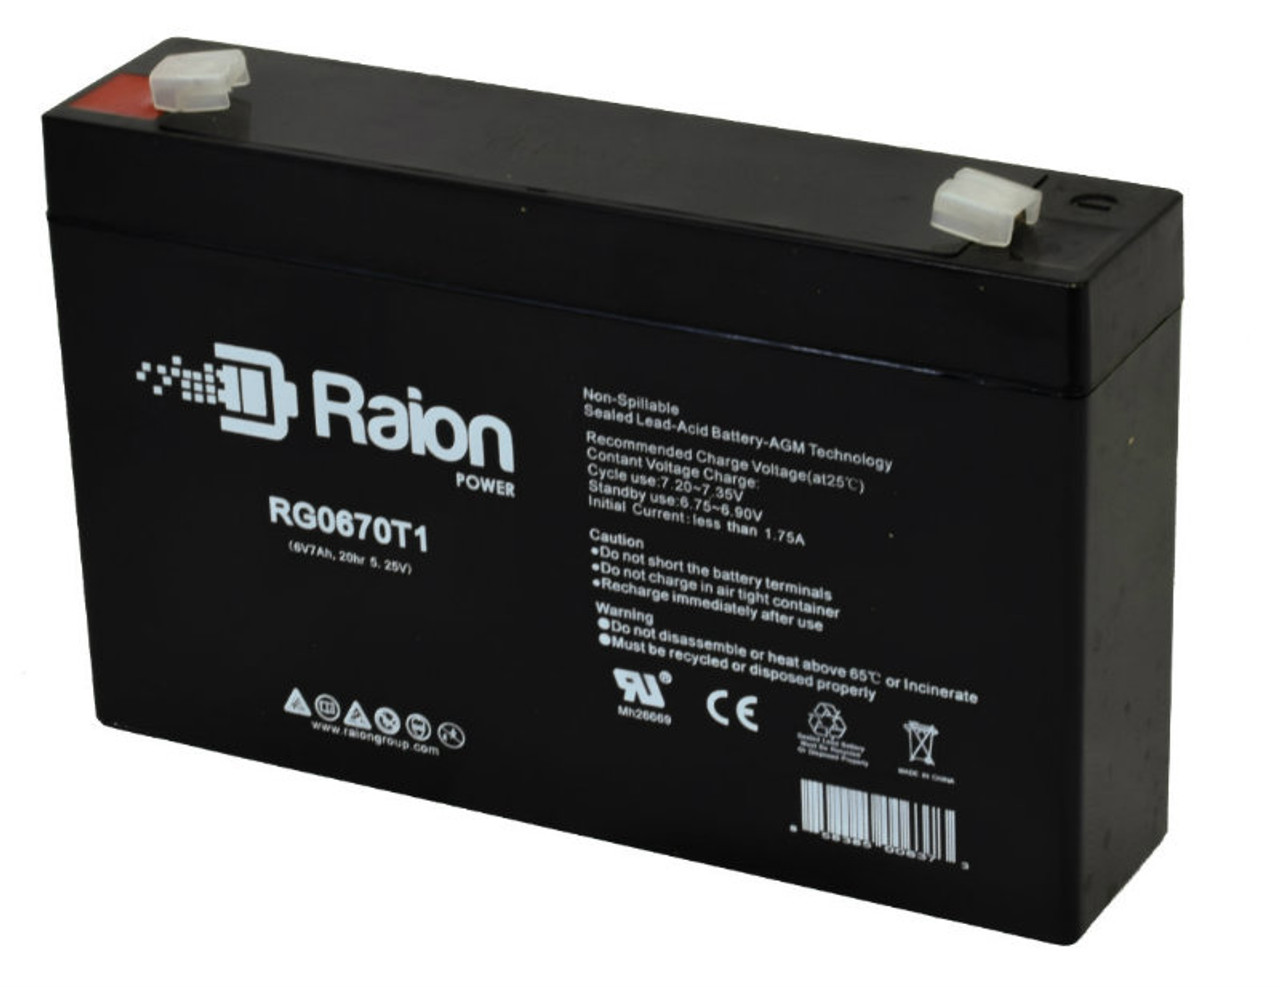 Raion Power RG0670T1 Replacement Battery for Motoma MS6V7 OEM Battery